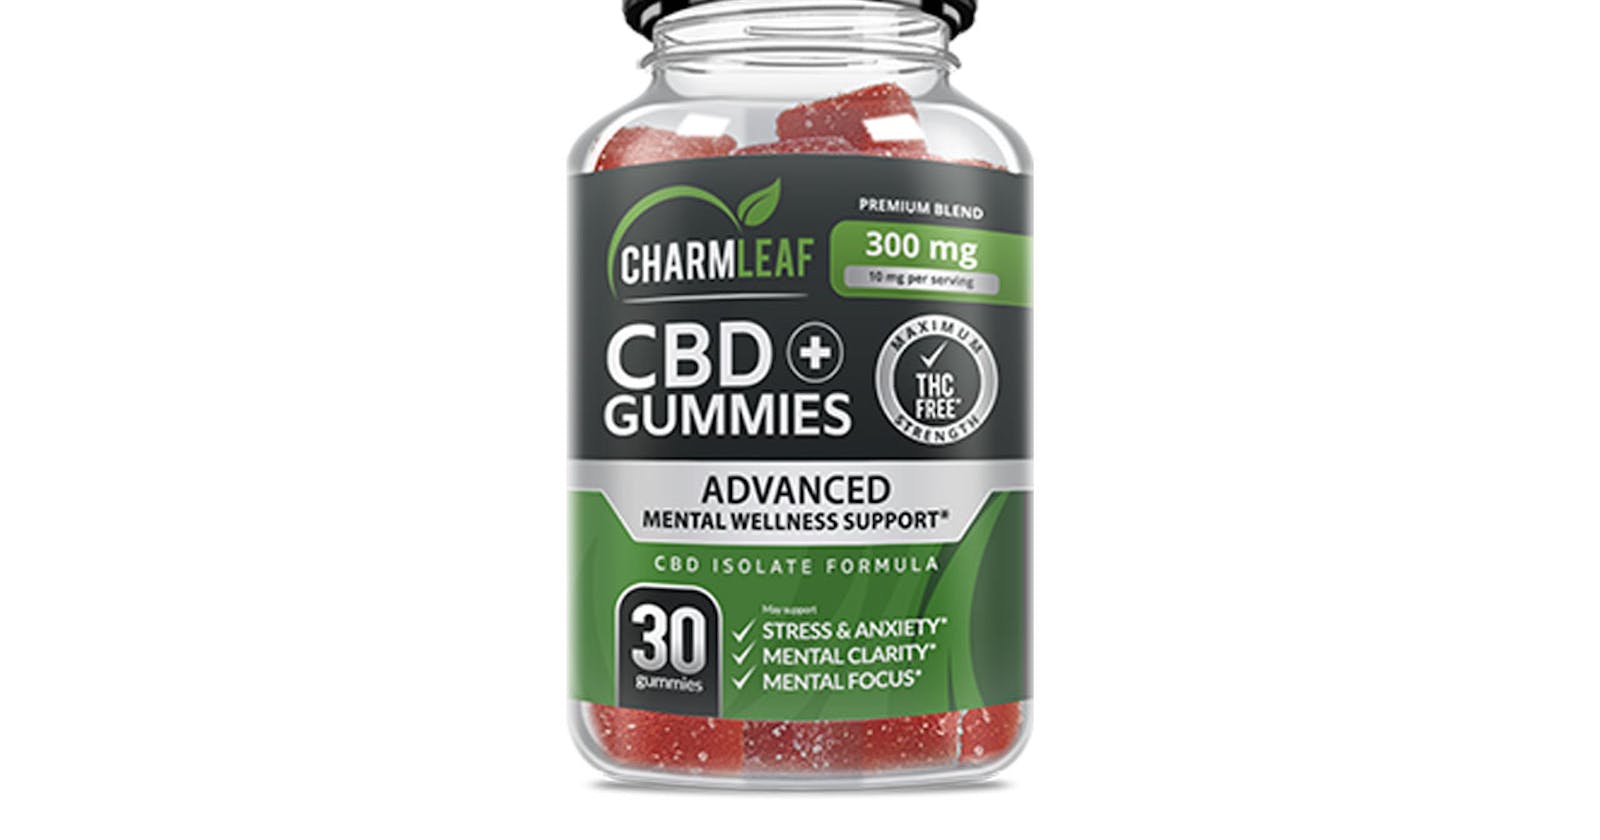 Charm Leaf CBD Gummies : World Best CBD Gummies For Pain Relief In 2023 : Offers And Price